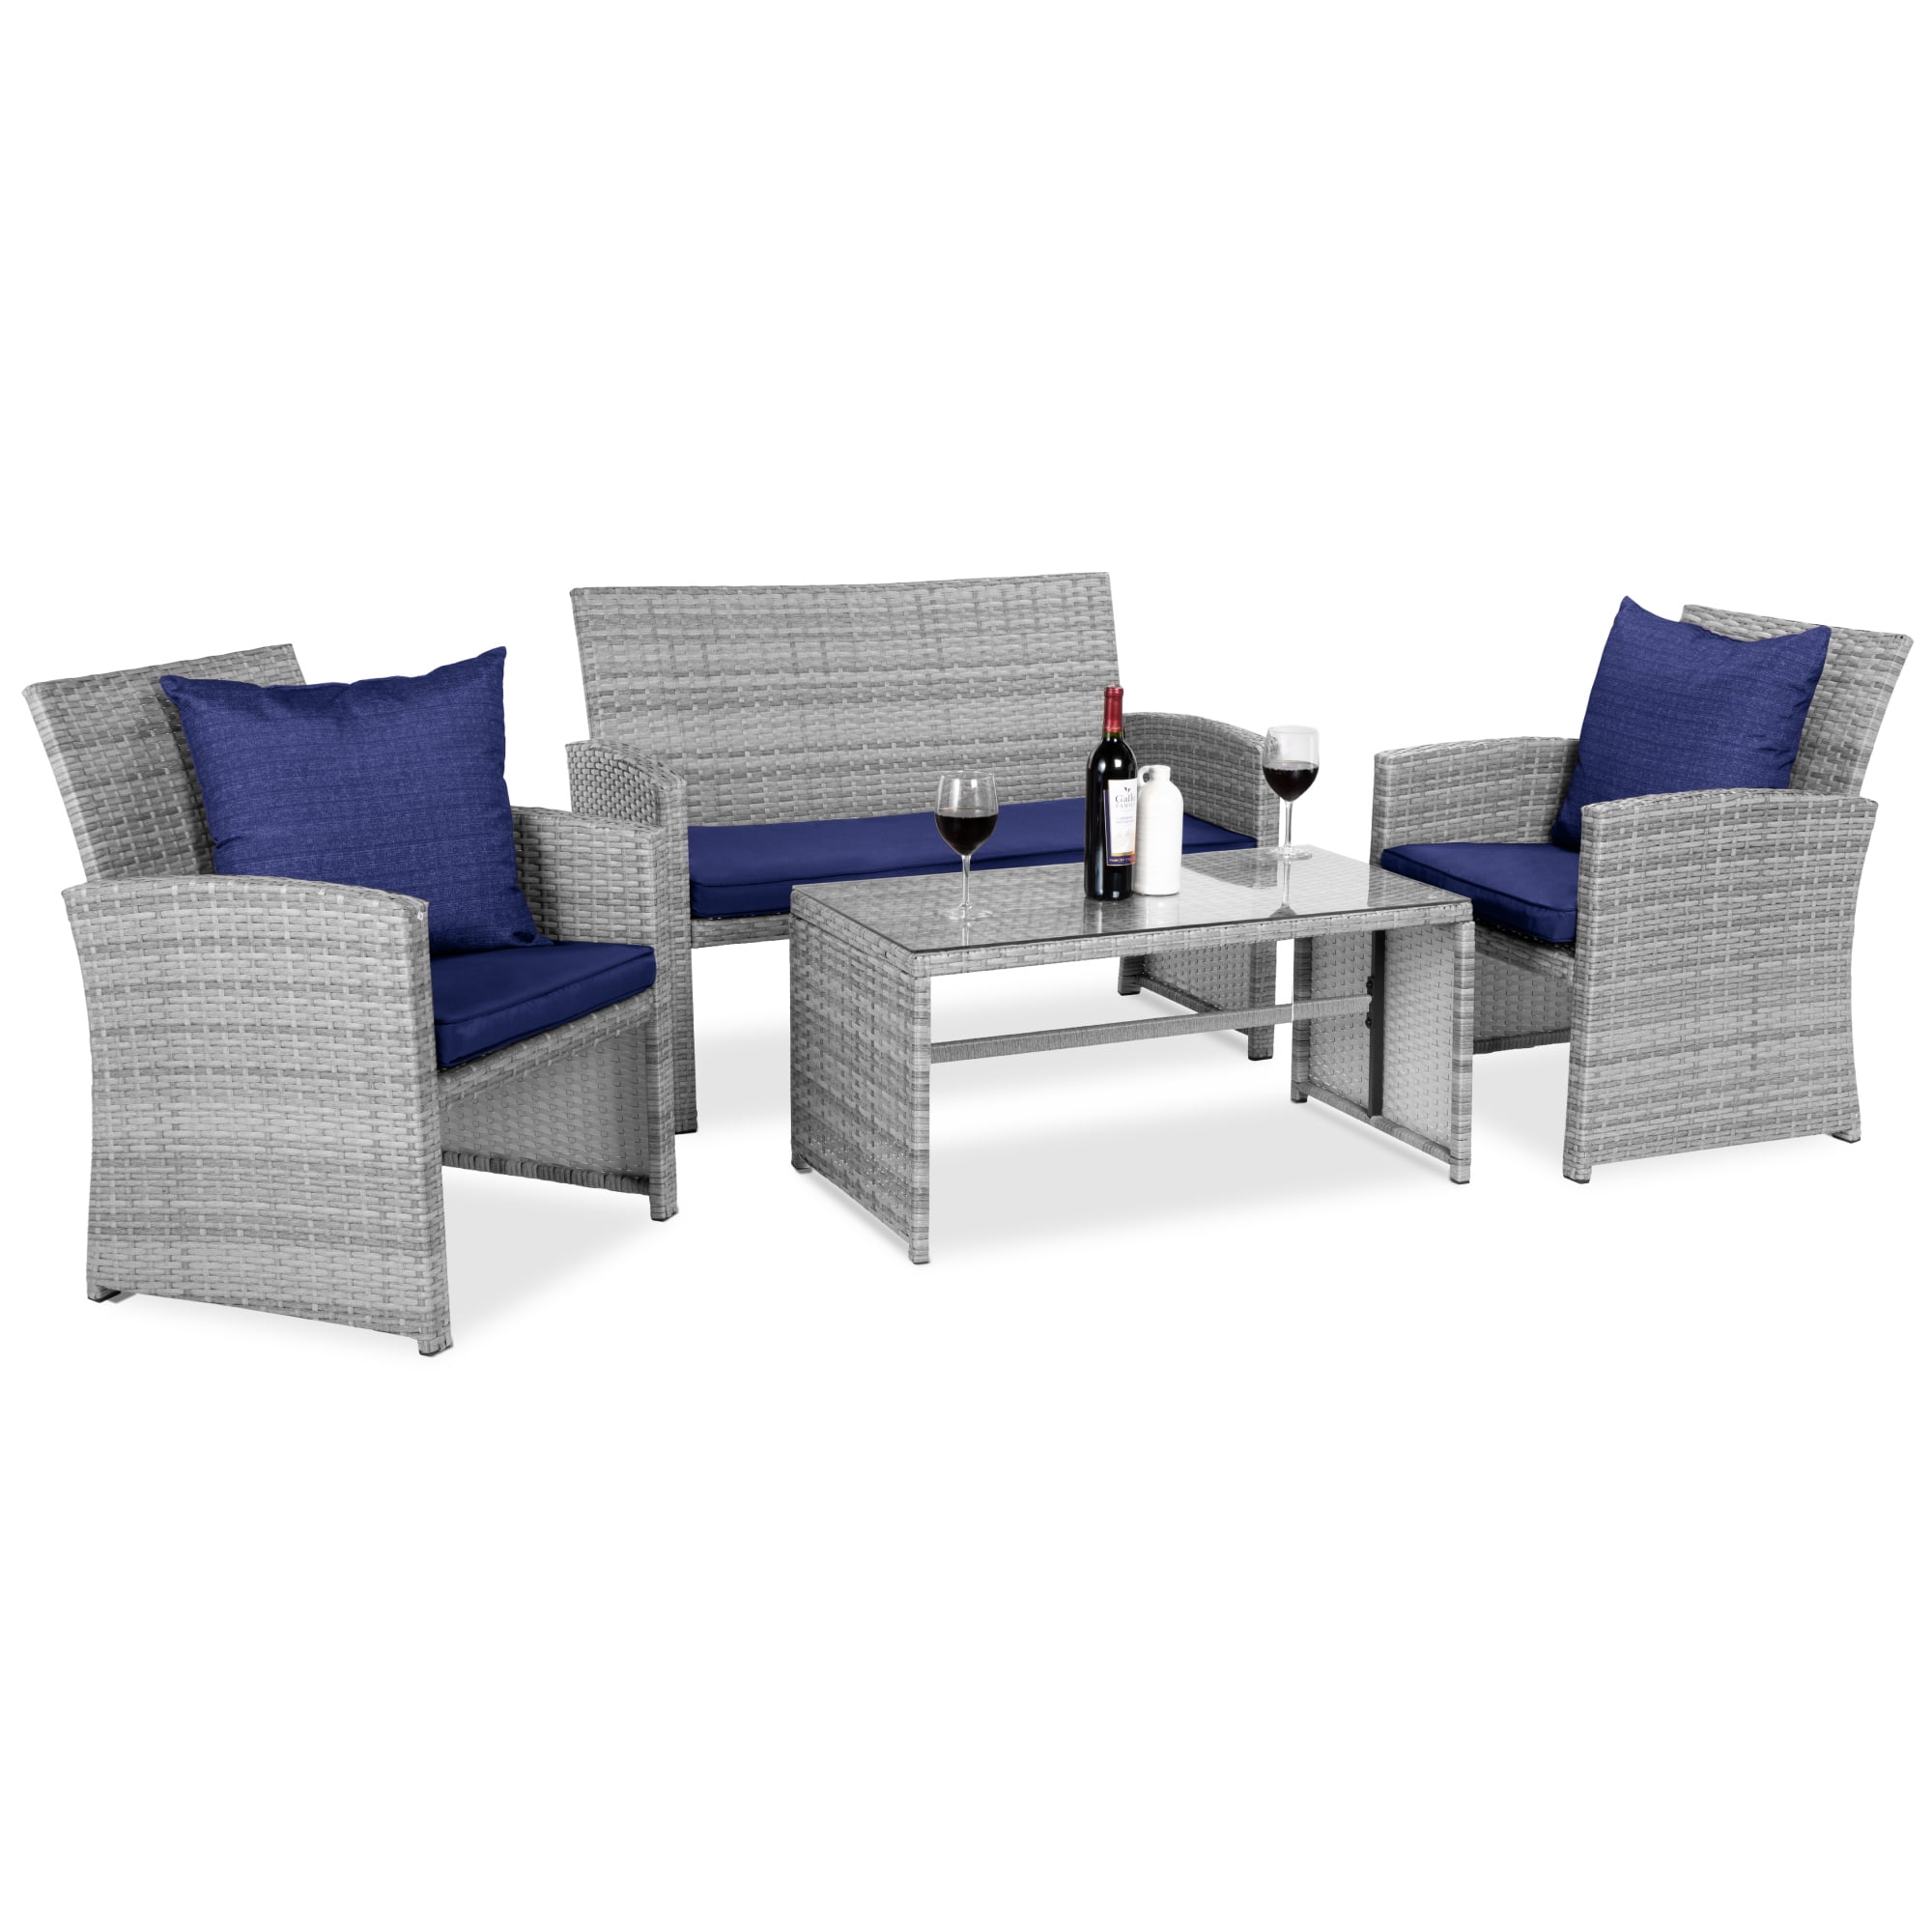 Best Choice Products 4 Piece Wicker Patio Conversation Furniture Set W 4 Seats Tempered Glass Tabletop Gray Navy Walmart Com